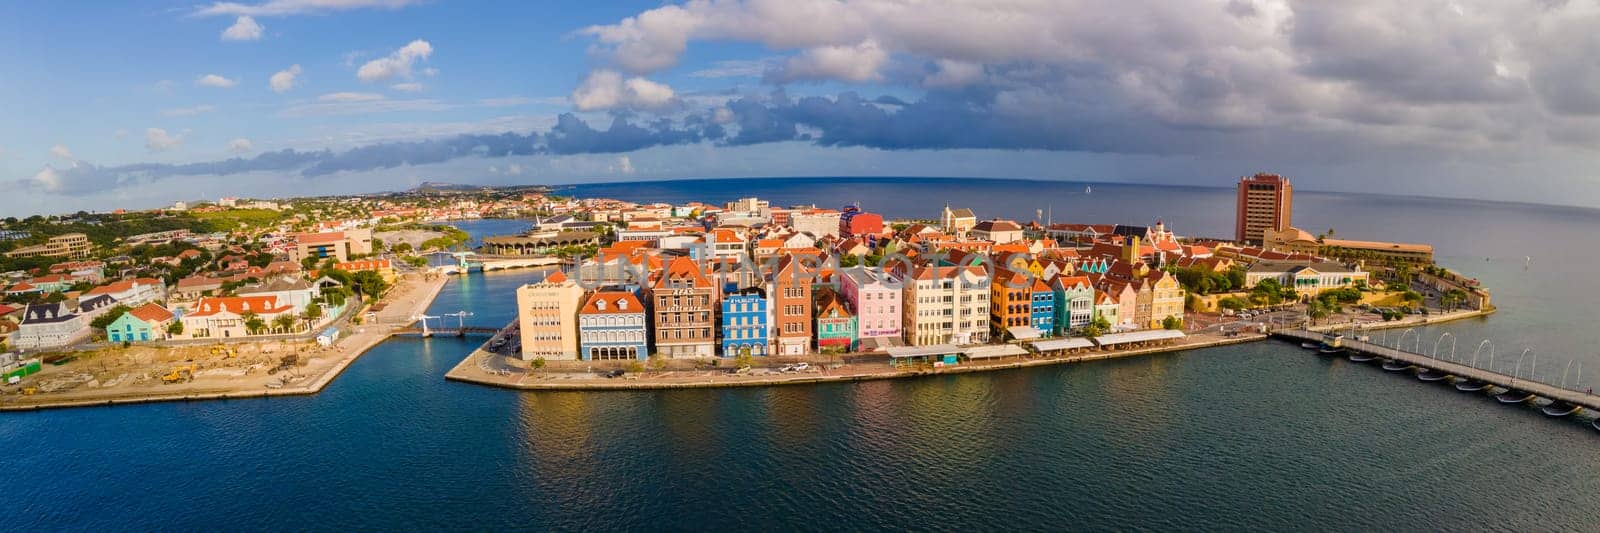 Willemstad Curacao March 2021, colorful buildings around Willemstad Punda and Otrobanda, multicolored homes Curacao Caribean Island seen from a drone